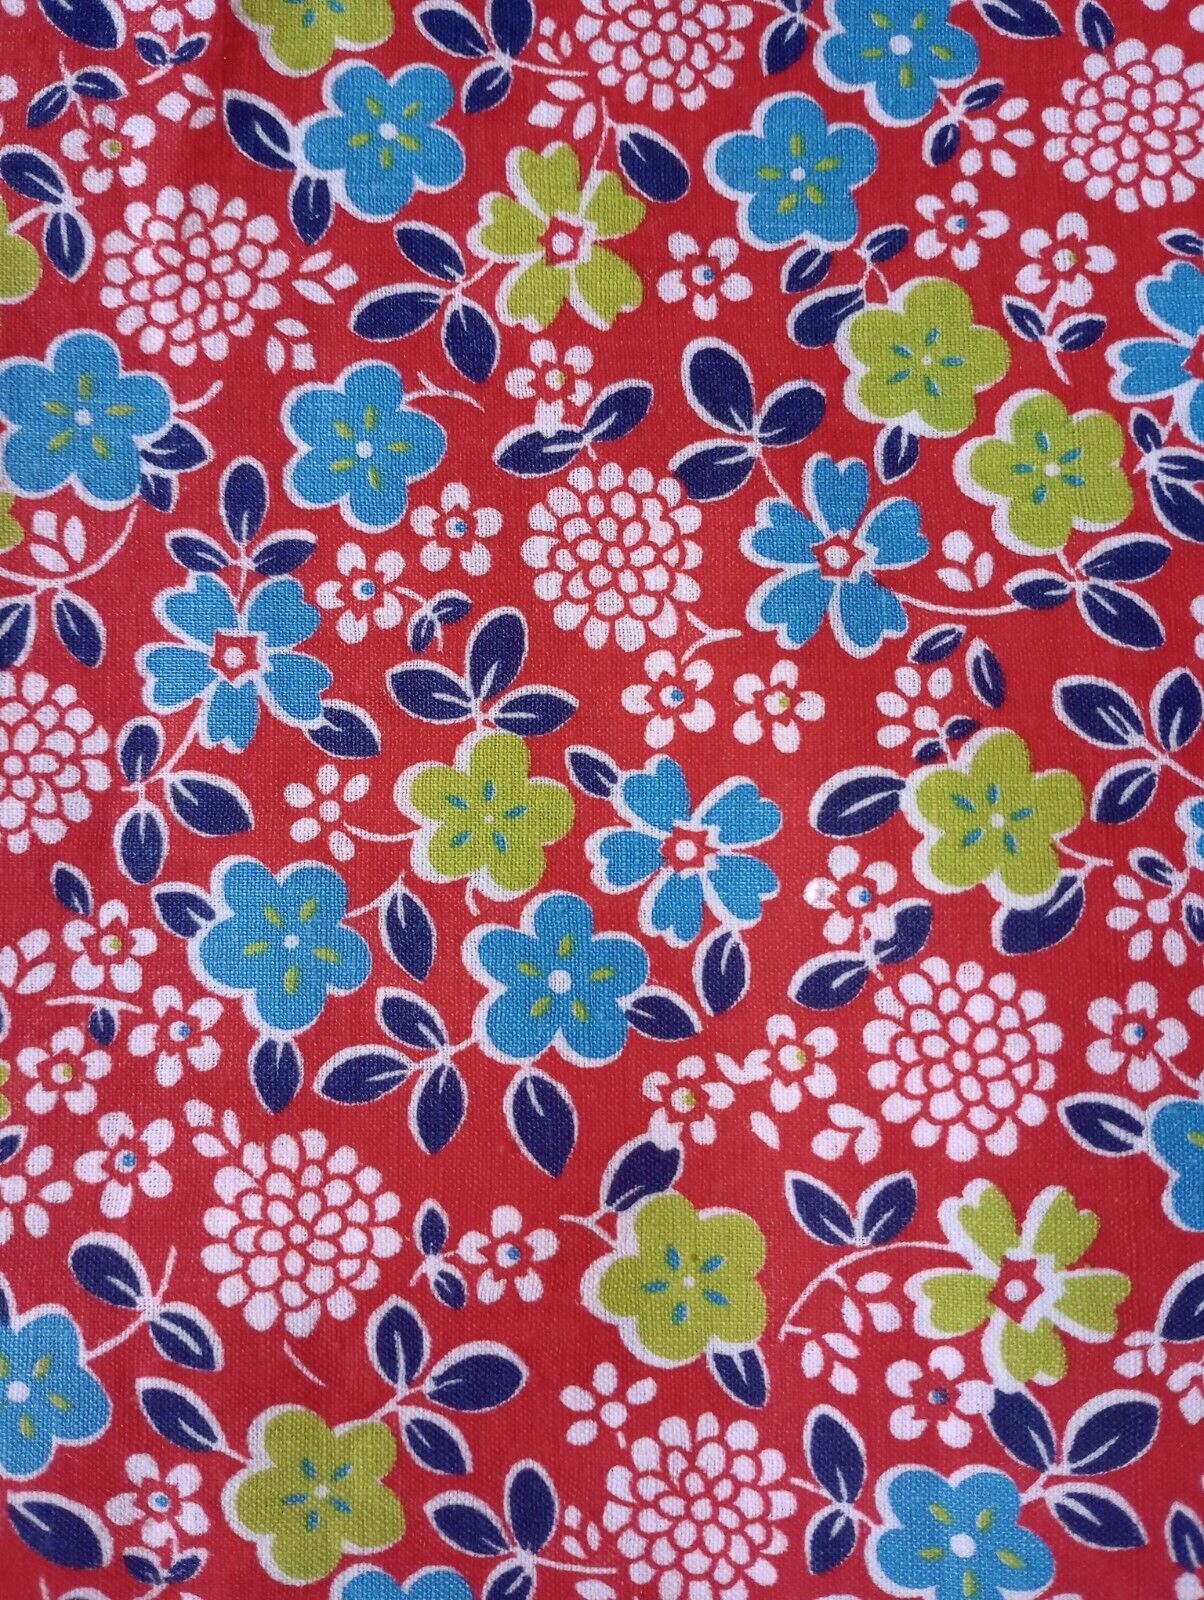 Vintage 30s 40s FABRIC 34.5 Wide Blue Green Flowers Quilting Fabric Red BHTY